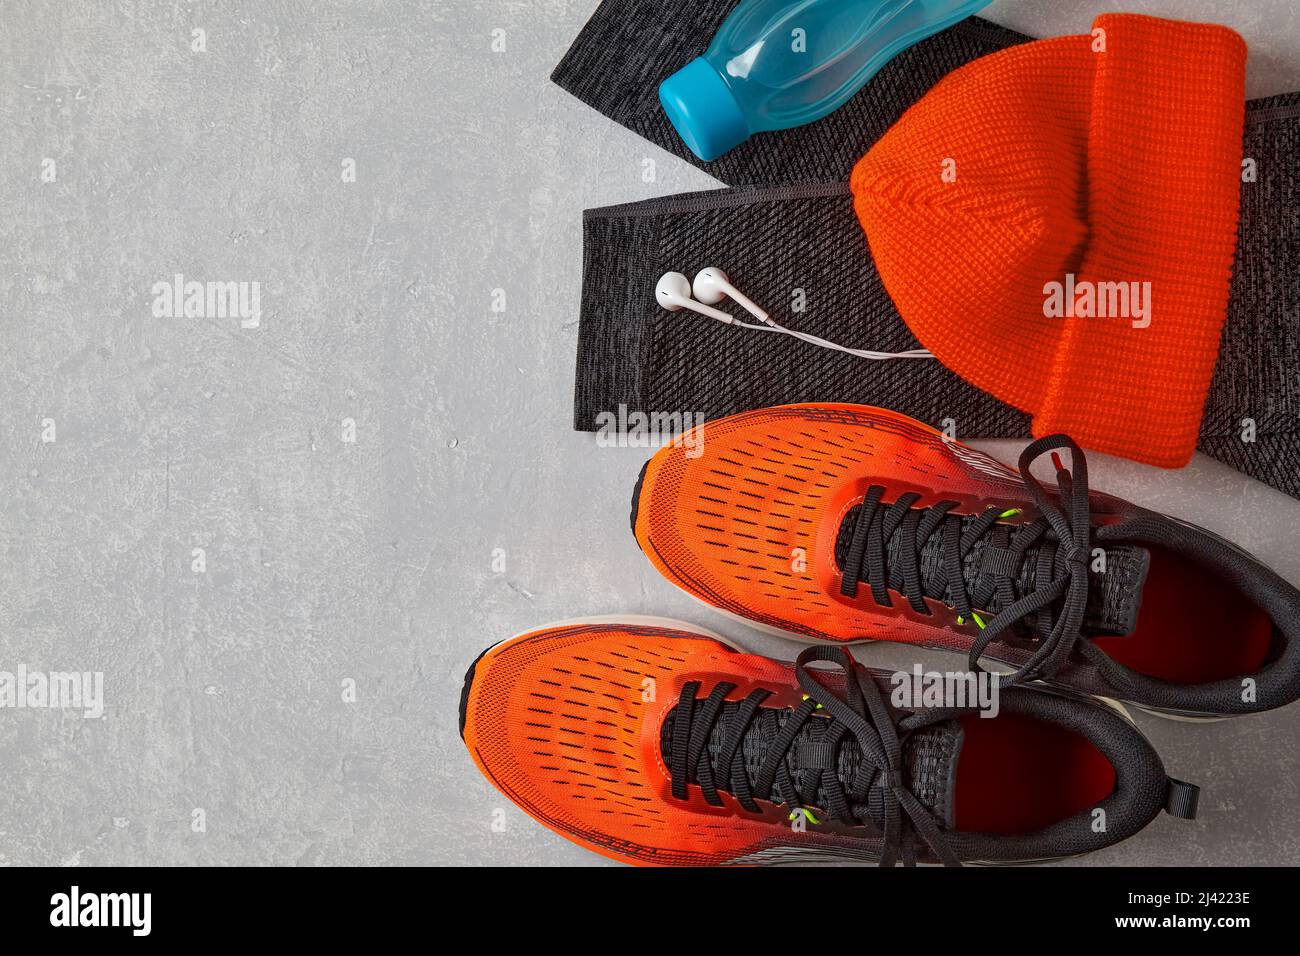 Orange sneakers, an orange knitted hat, warm leggings for sports, a bottle of water and white headphones on a light concrete table. Winter running equ Stock Photo